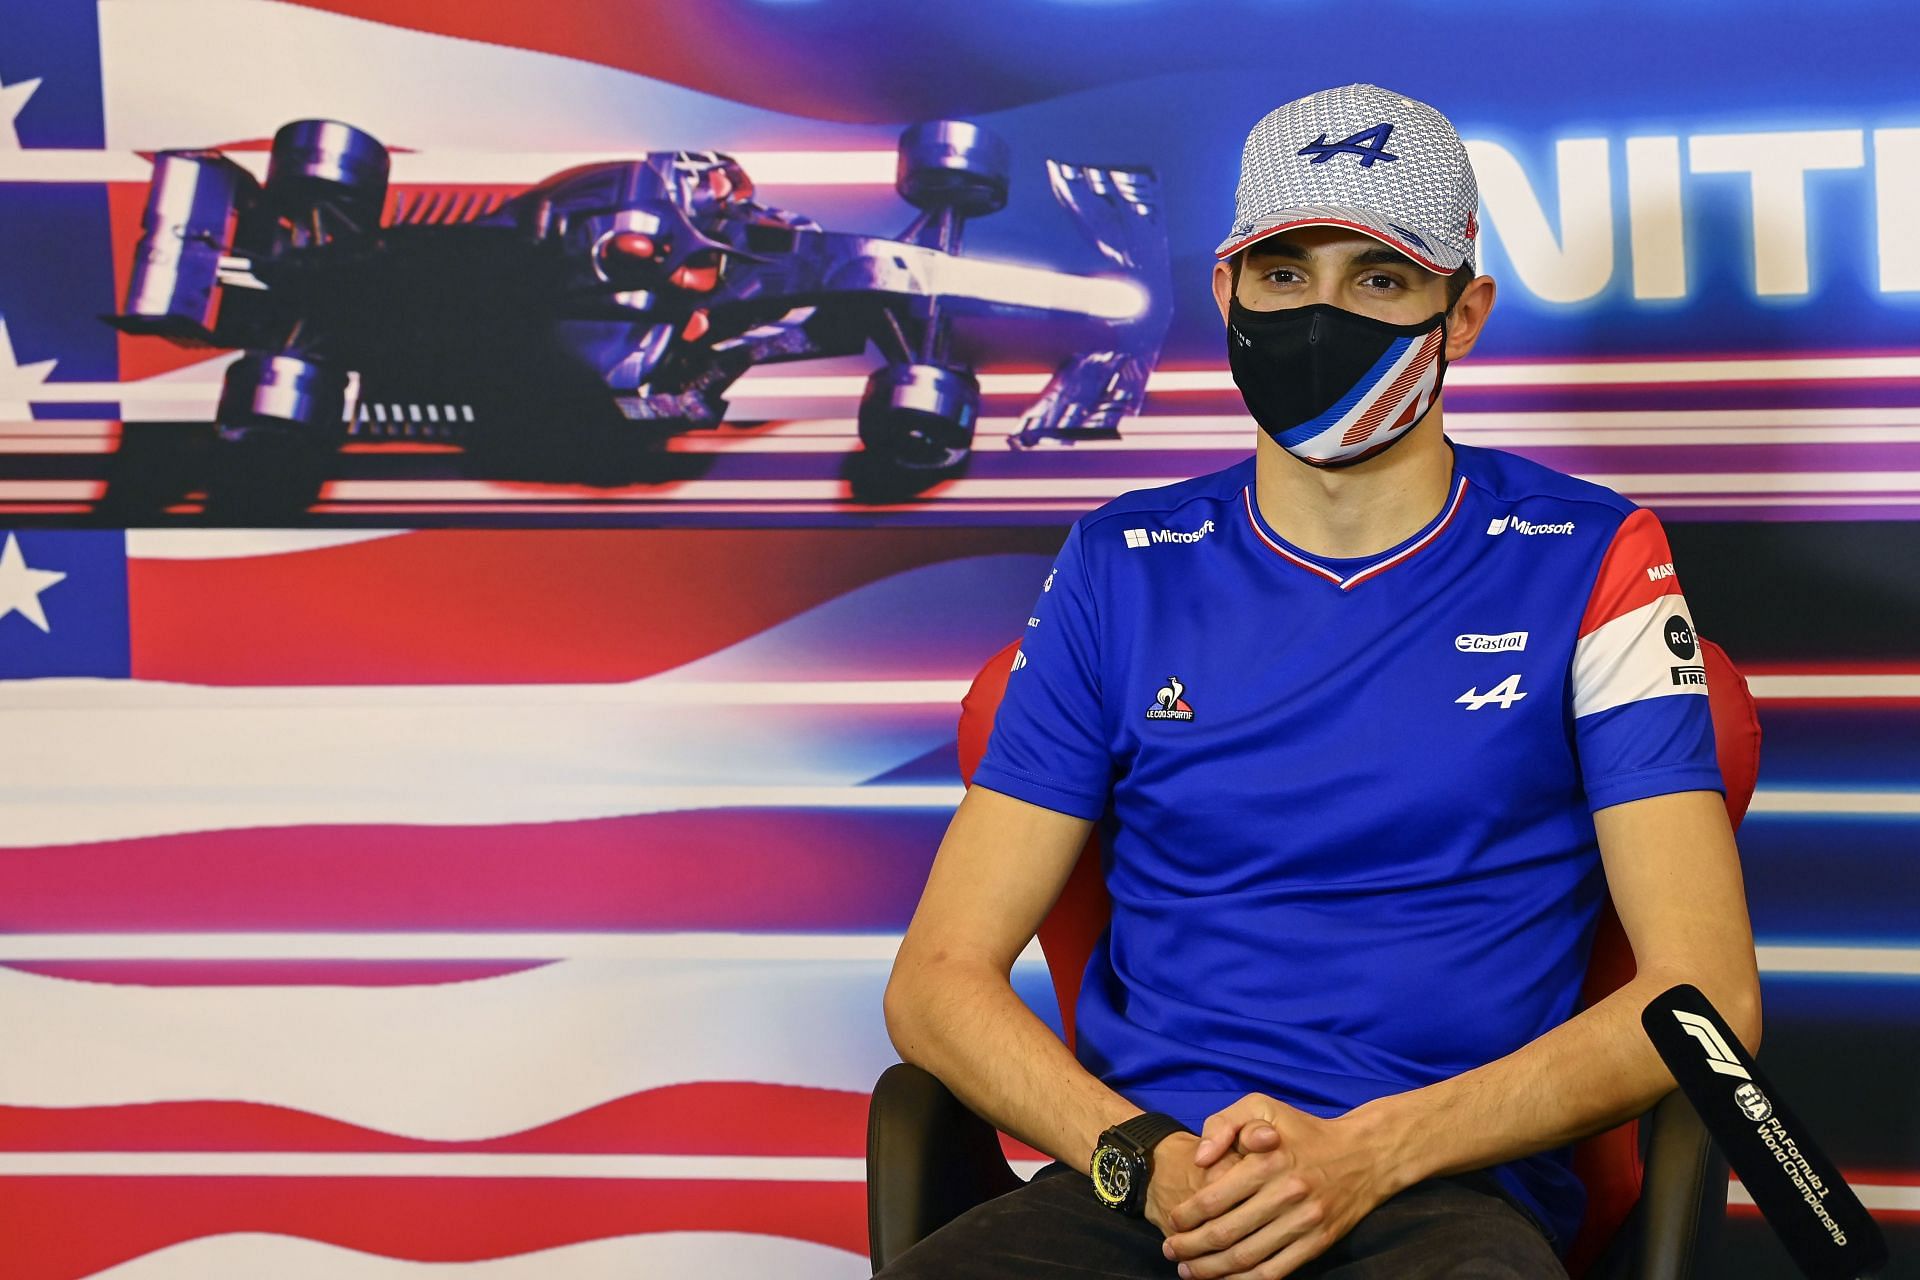 Esteban Ocon of Alpine F1 Team talks in the Drivers Press Conference ahead of the 2021 USGP. (Photo by Mark Sutton - Pool/Getty Images)